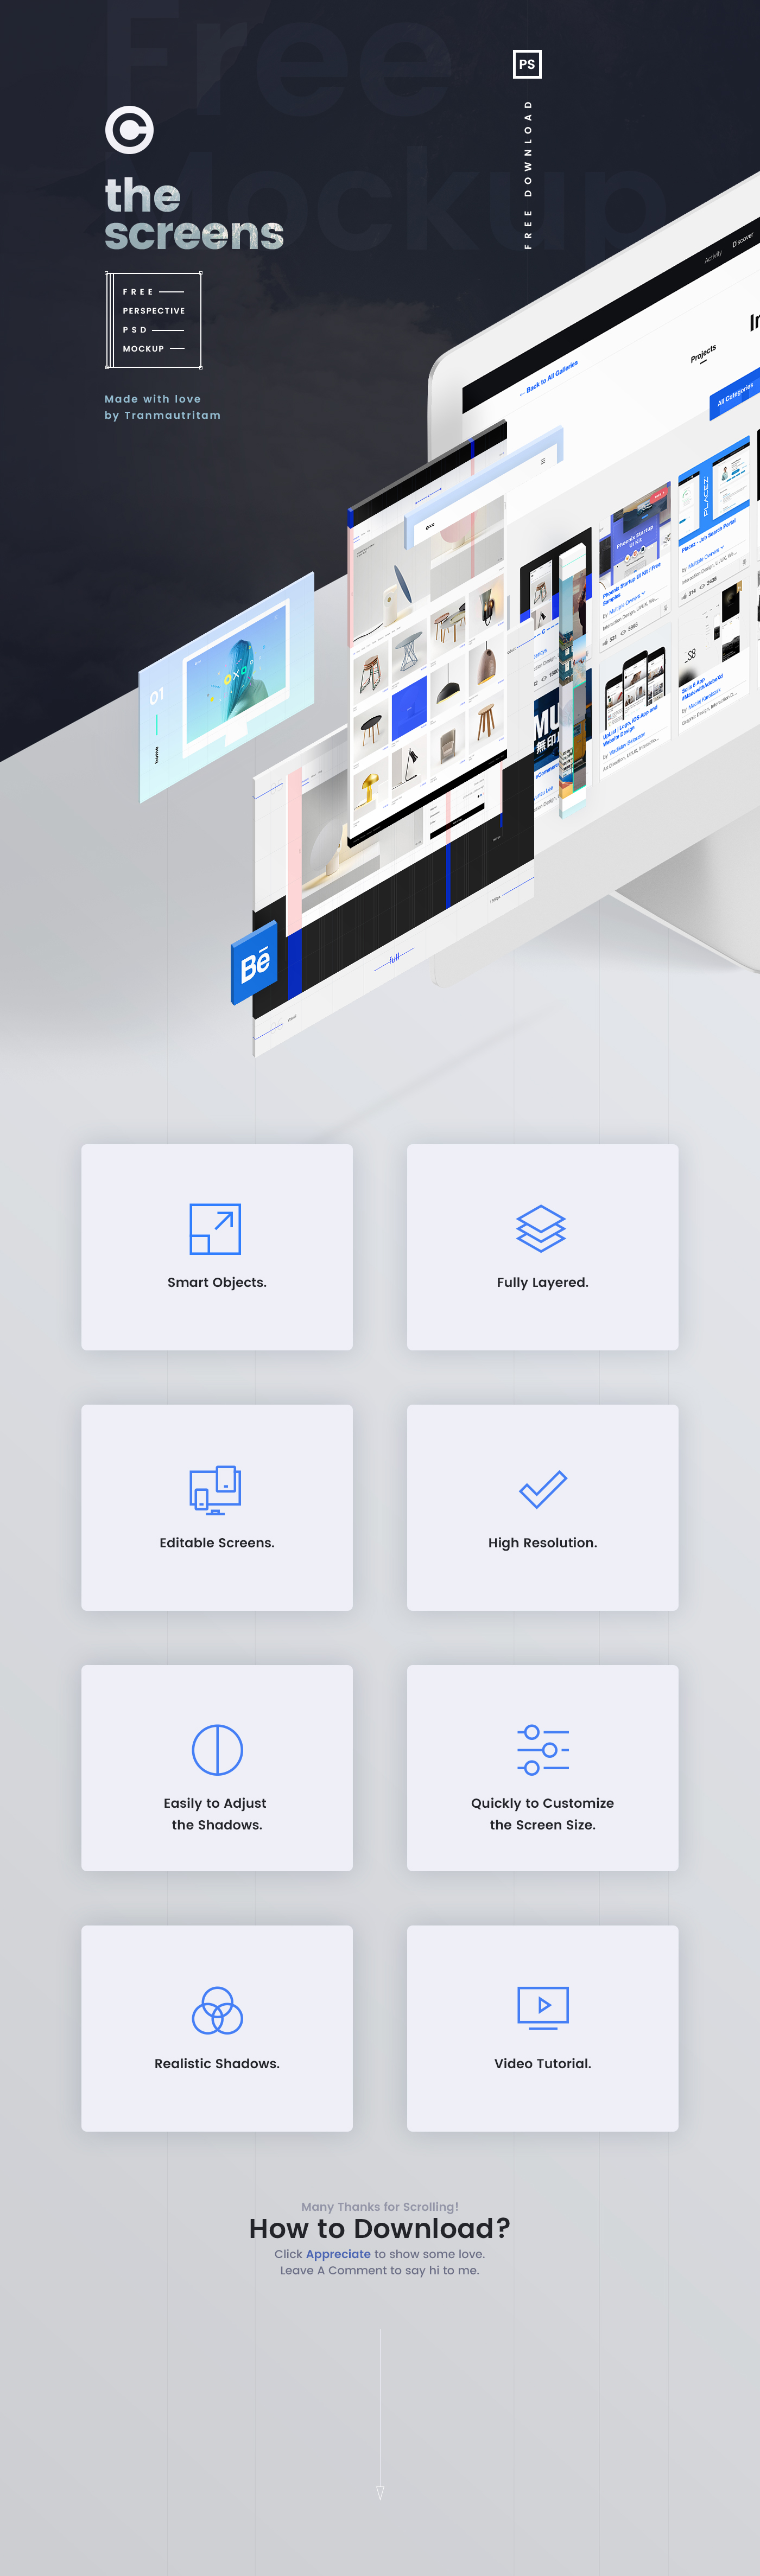 Download The Screens Free Perspective Psd Mockup Template On Behance